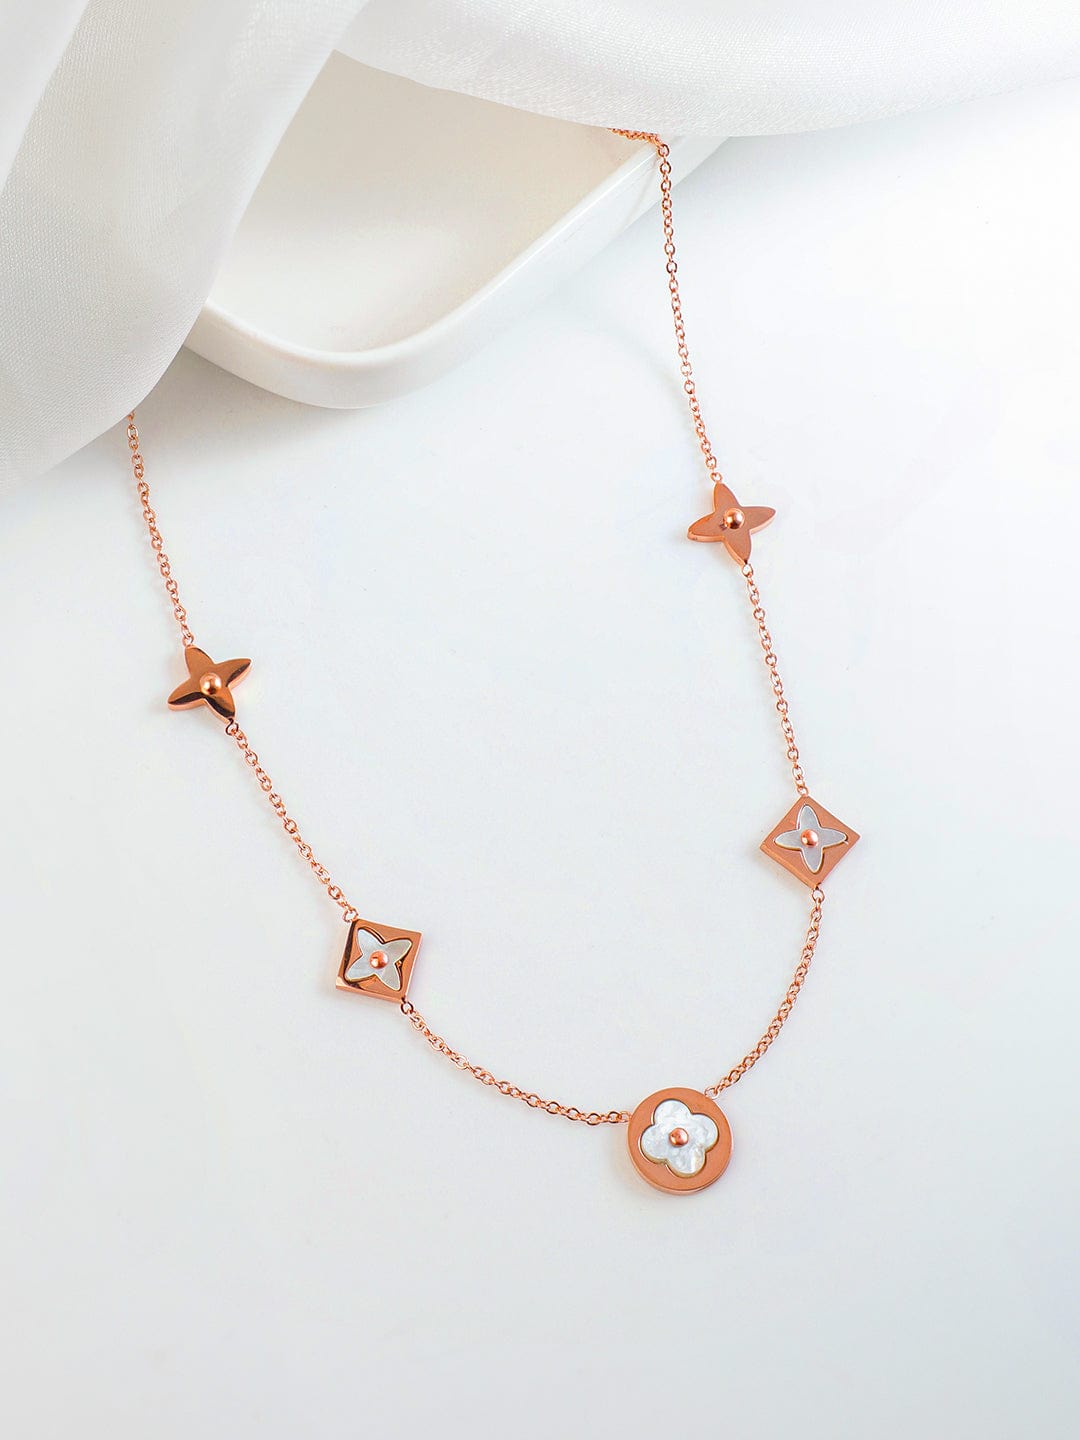 Rose Gold Plated Pendant Necklace And Chain Chain & Necklace